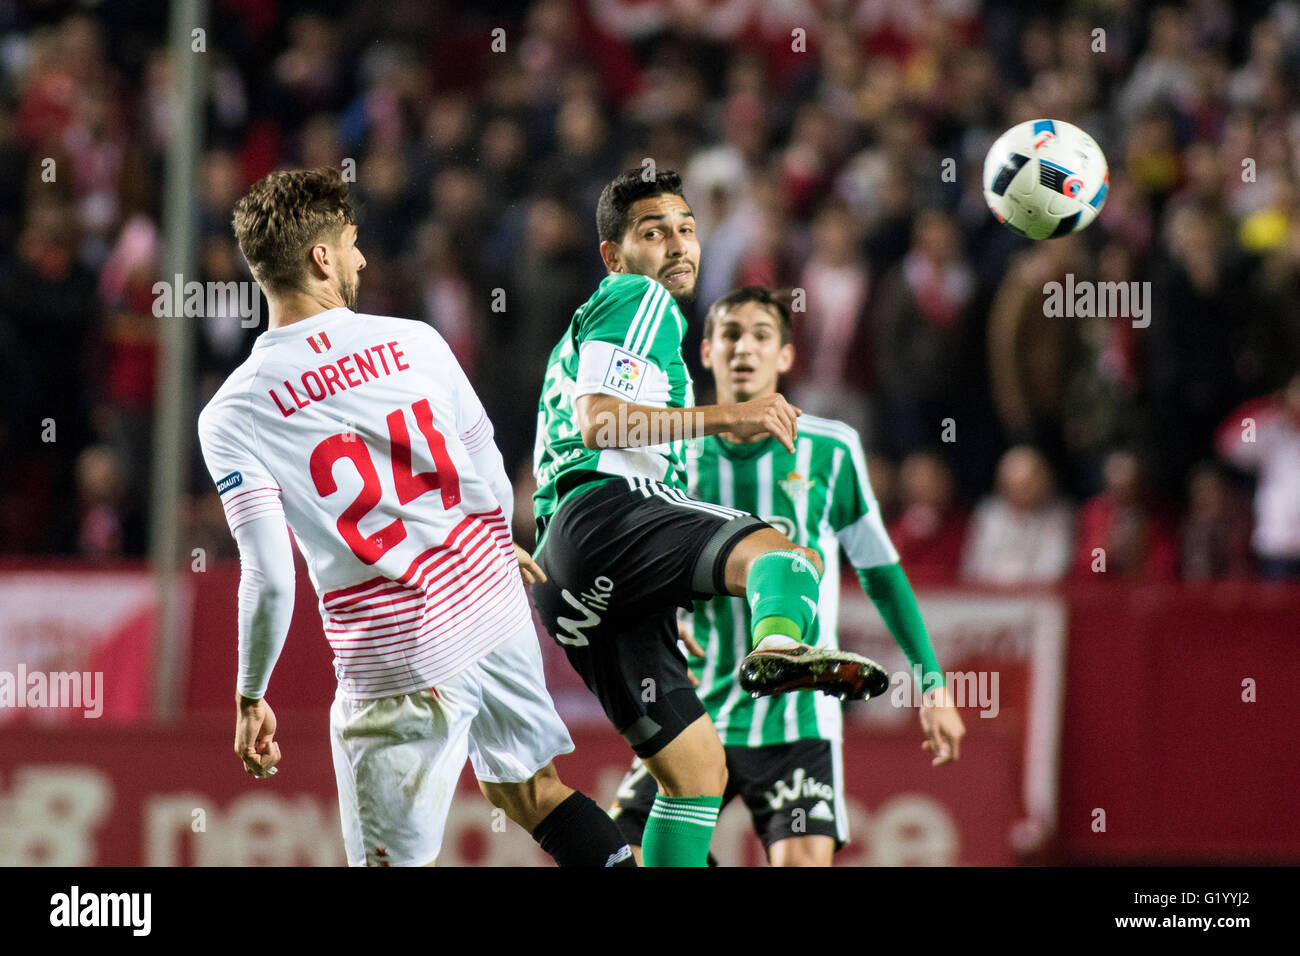 Fernando Llorente of Sevilla (L ) vies for the ball with Petros Matheus dos Santos Araujo of Real Betis (R ) during the match of King's Cup between Sevilla FC and Real Betis at the Ramon Sanchez Pizjuan Stadium in Sevilla, Spain, 12 January, 2016 Stock Photo